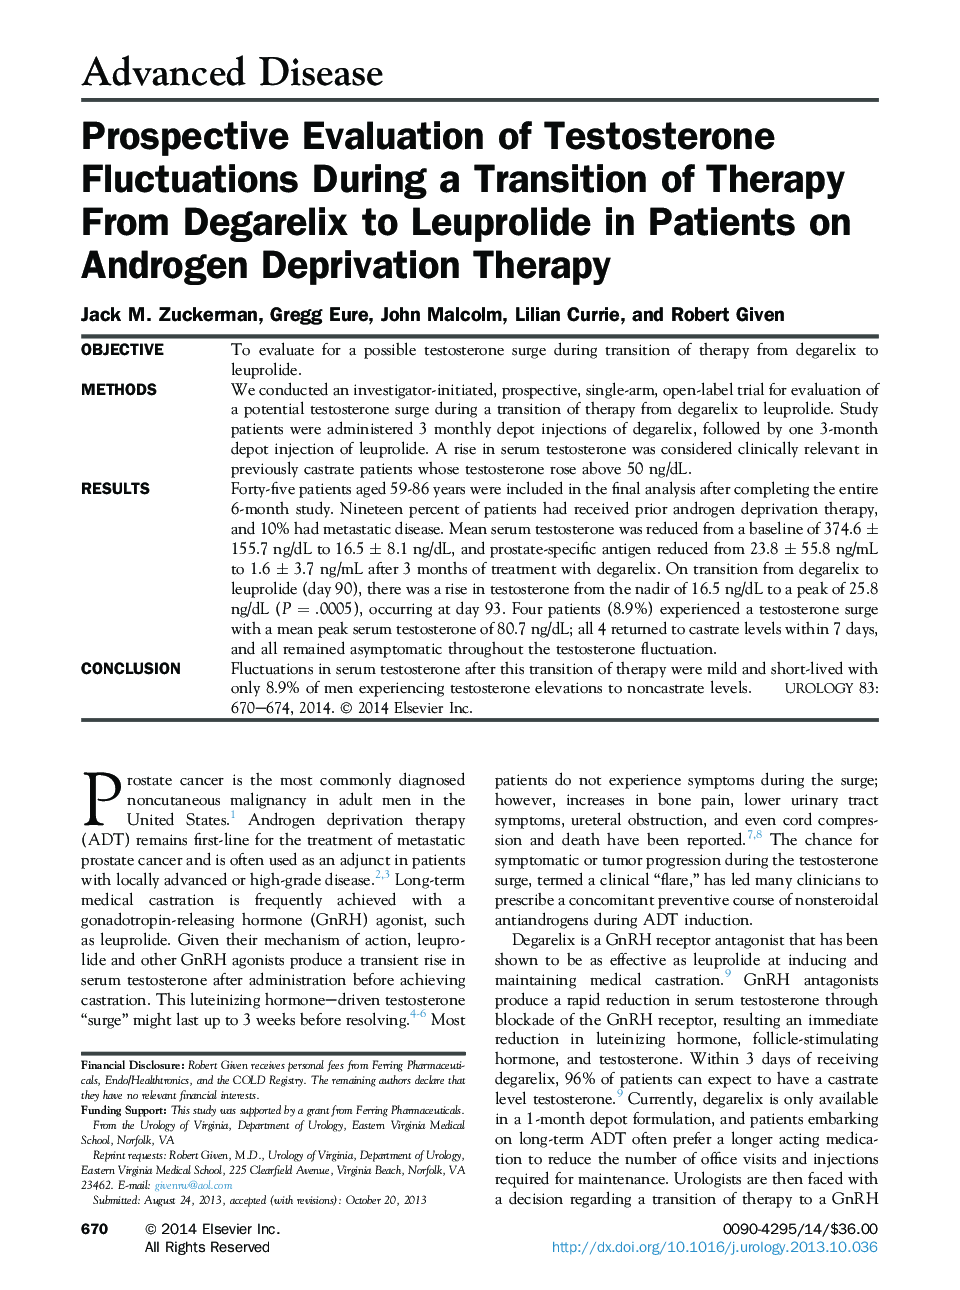 Prospective Evaluation of Testosterone Fluctuations During a Transition of Therapy From Degarelix to Leuprolide in Patients on Androgen Deprivation Therapy 